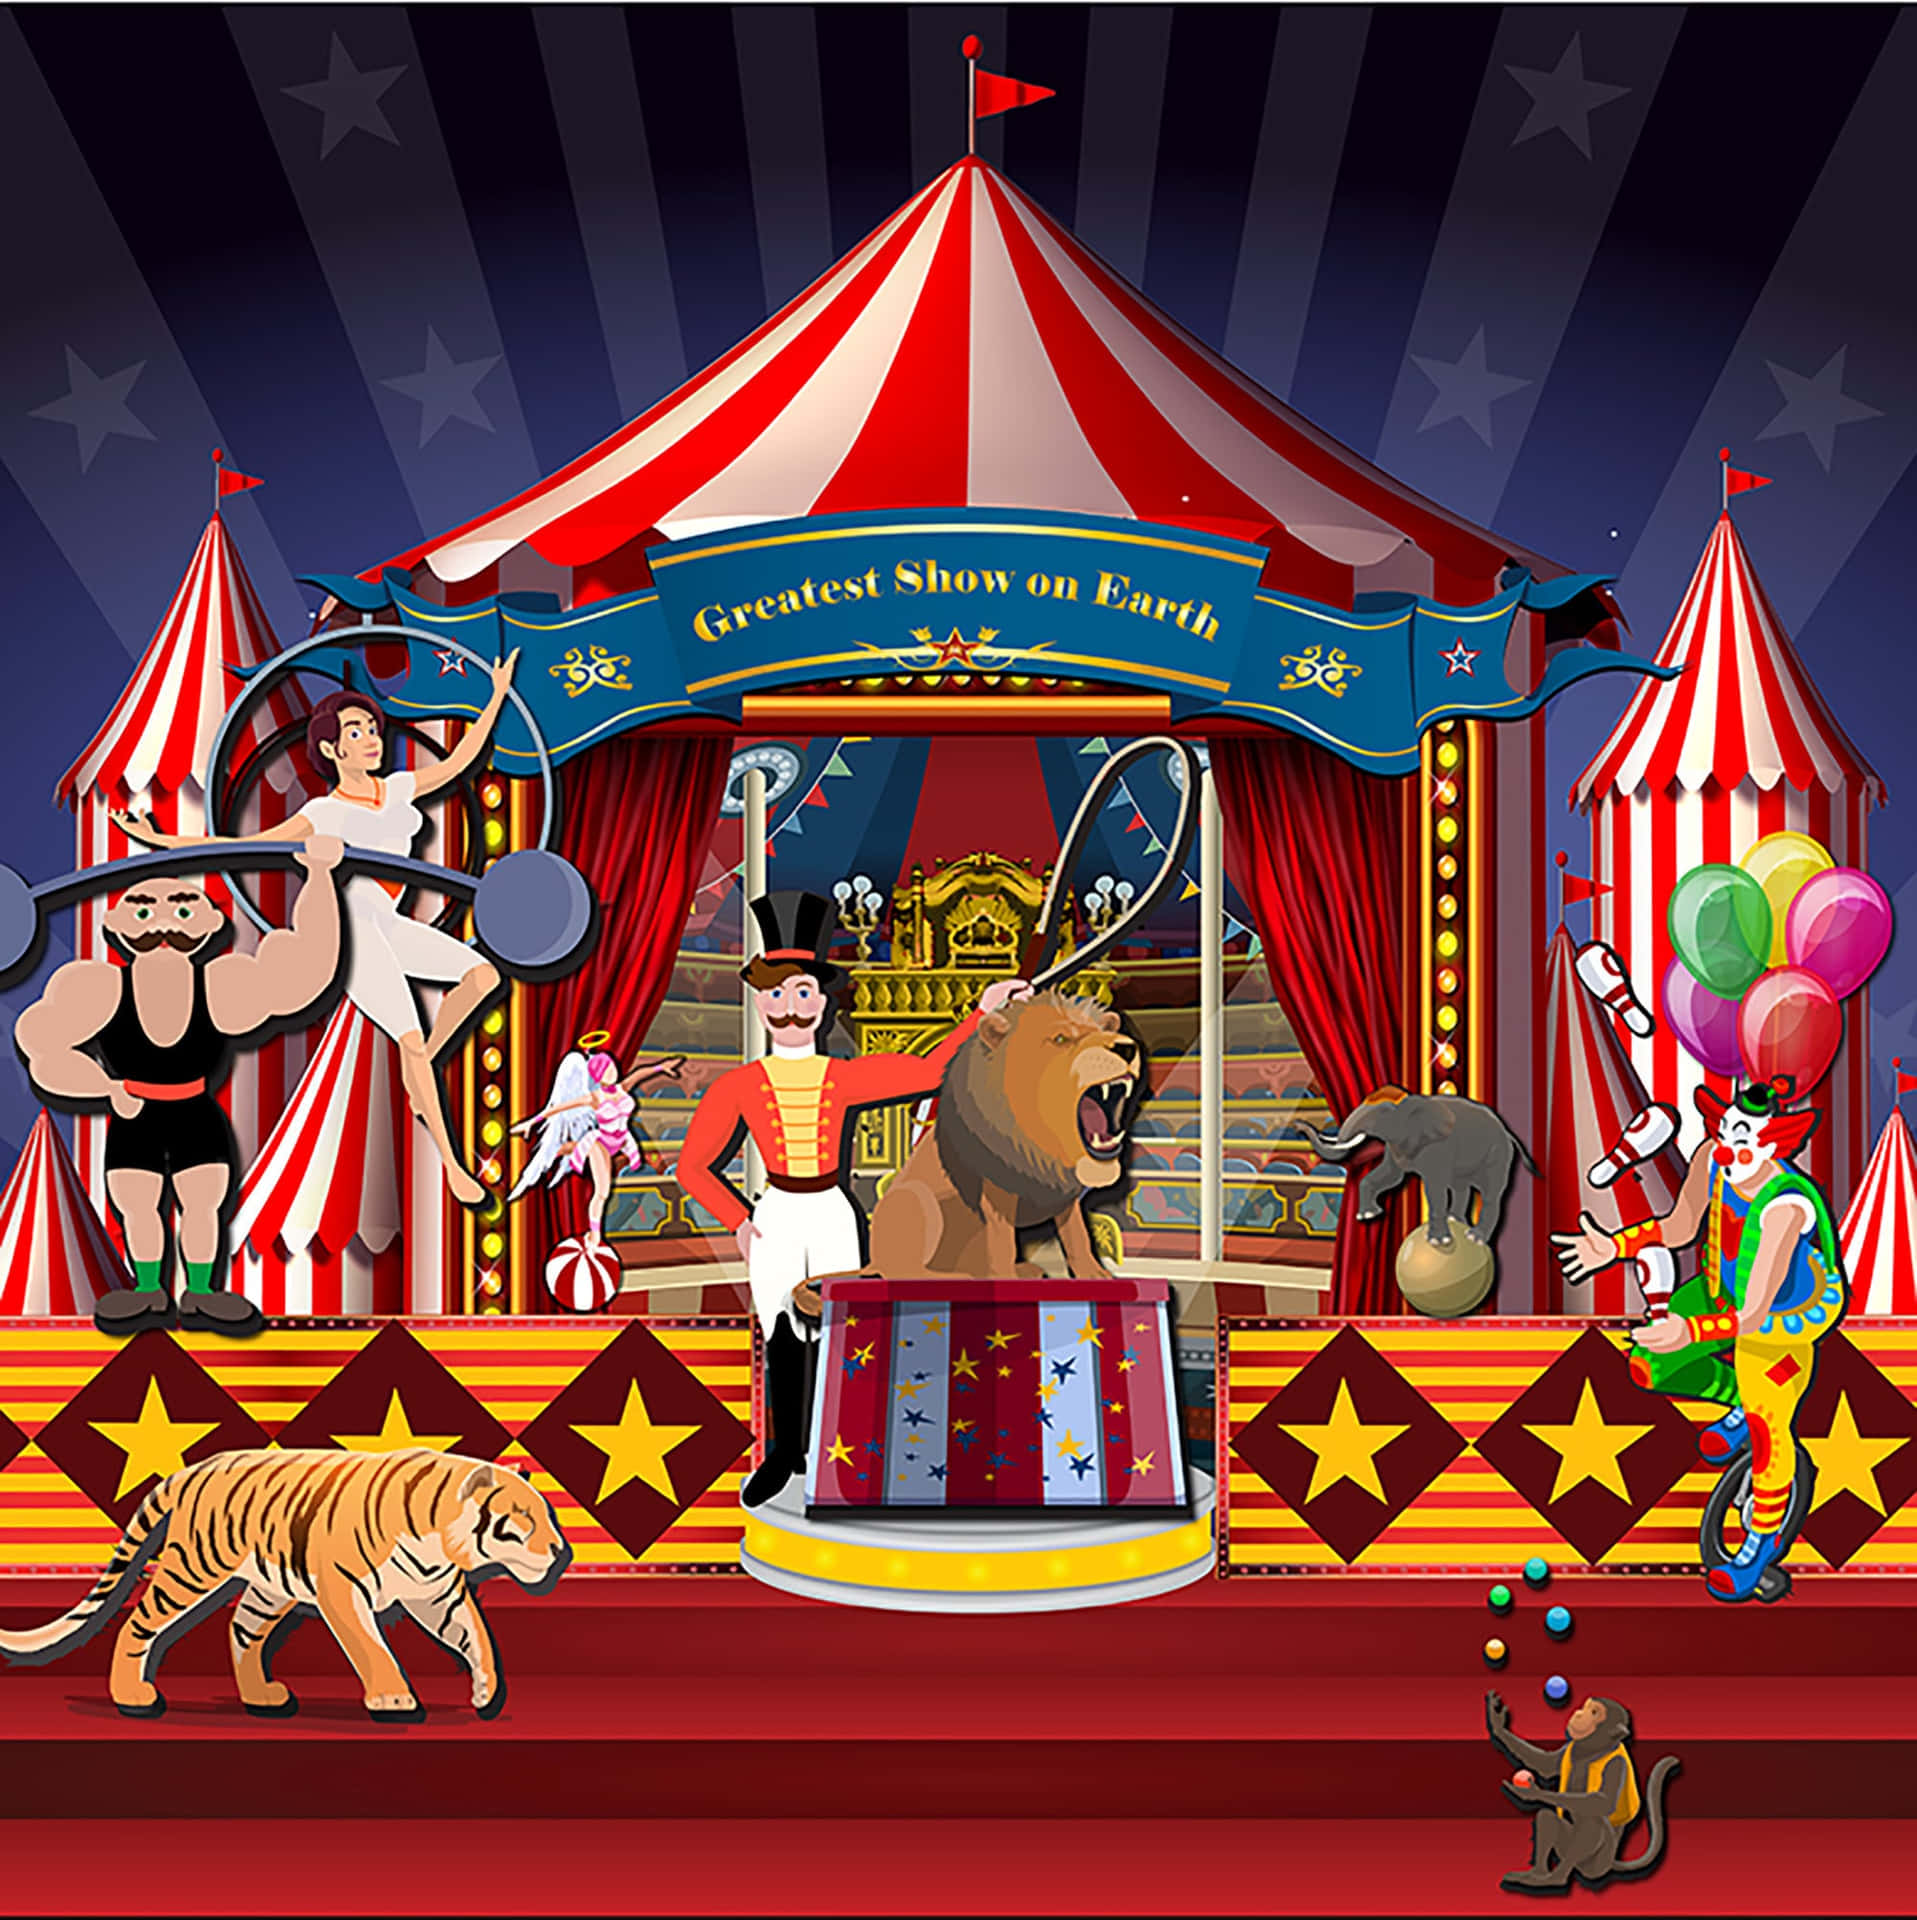 Fun and entertainment for the whole family await at the Circus